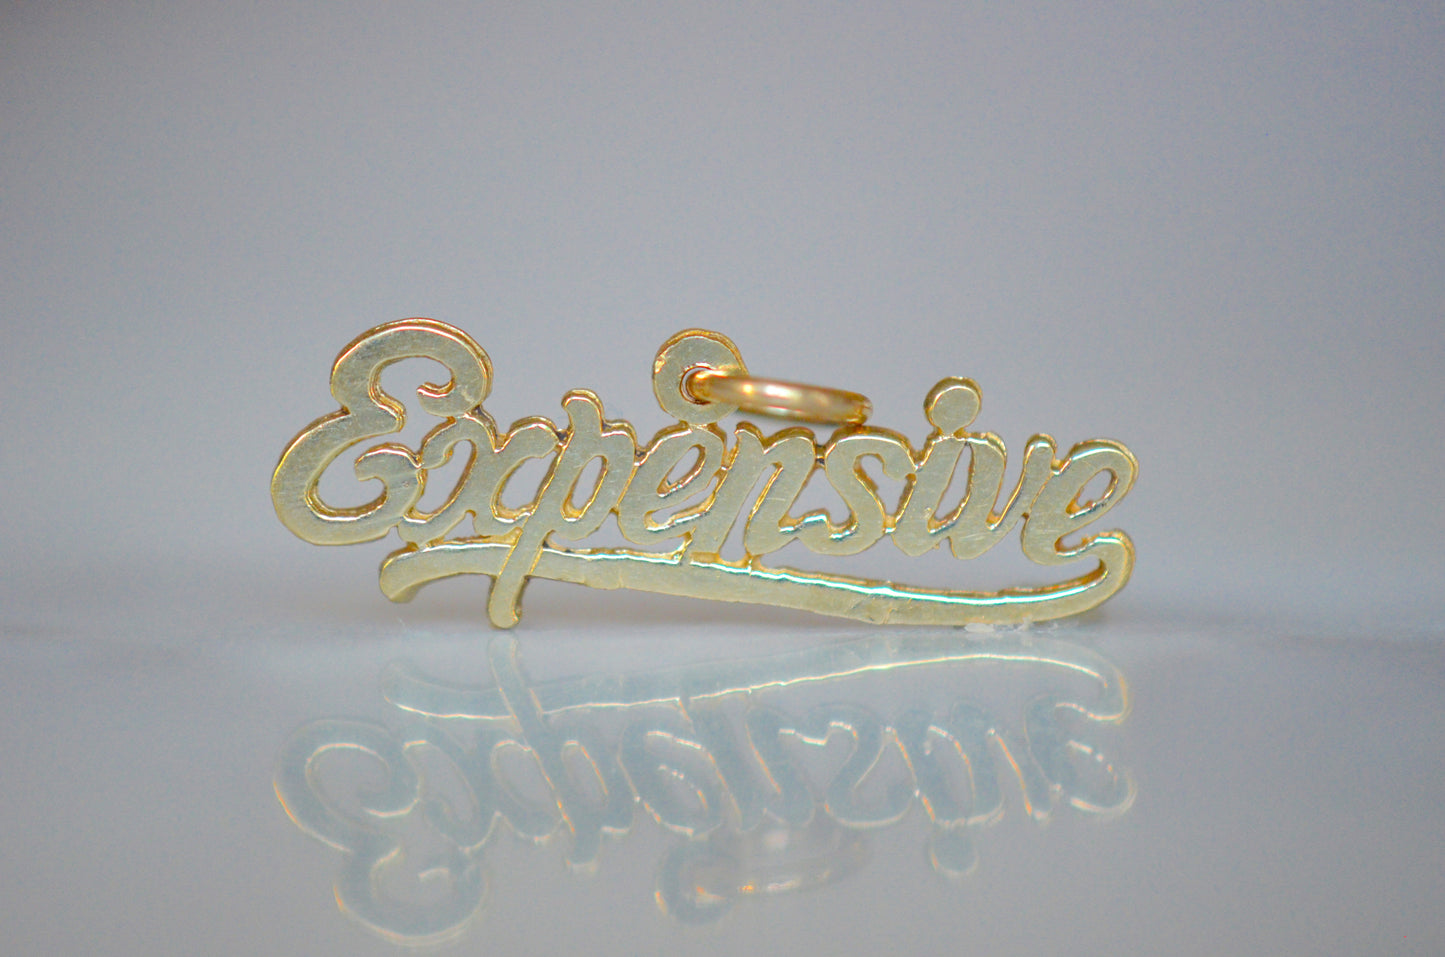 Deadstock "Expensive" Gold Nameplate